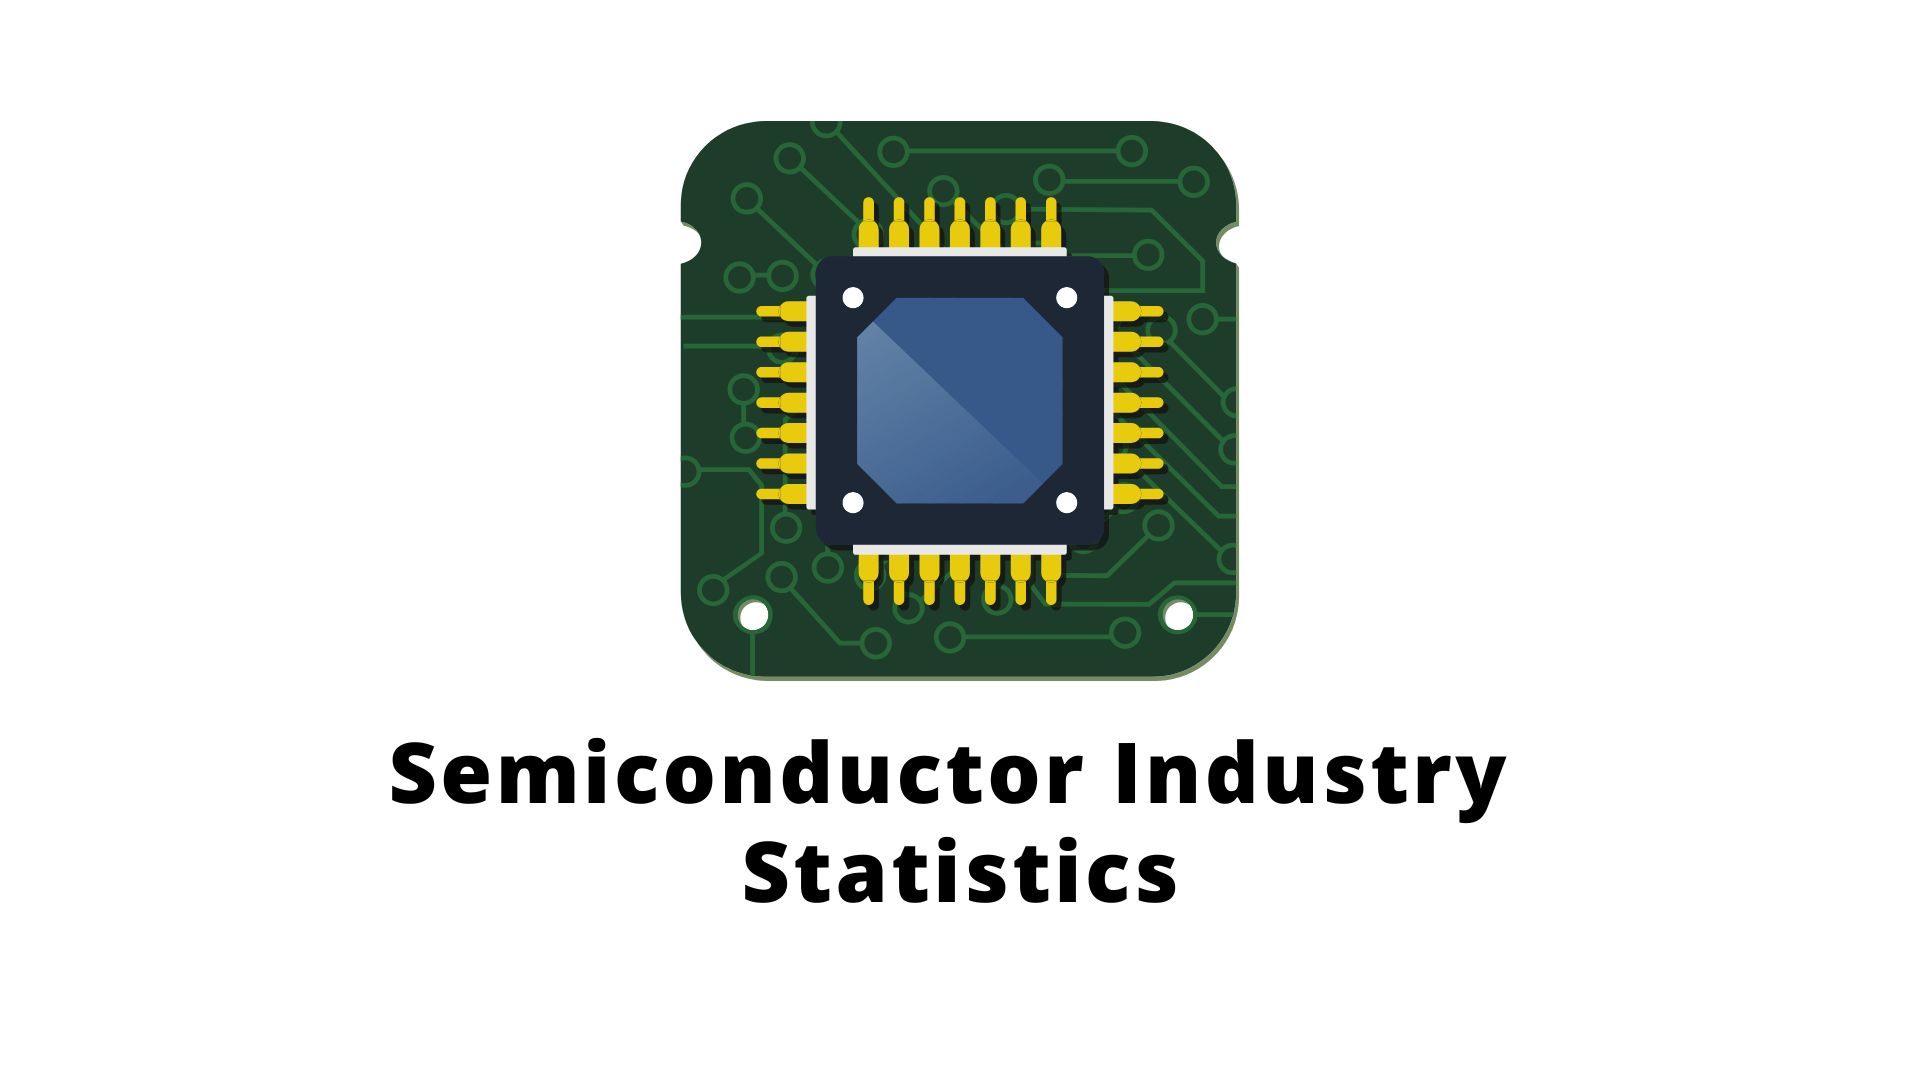 20+ Mind-Blowing Semiconductor Industry Statistics, Facts, and Trends